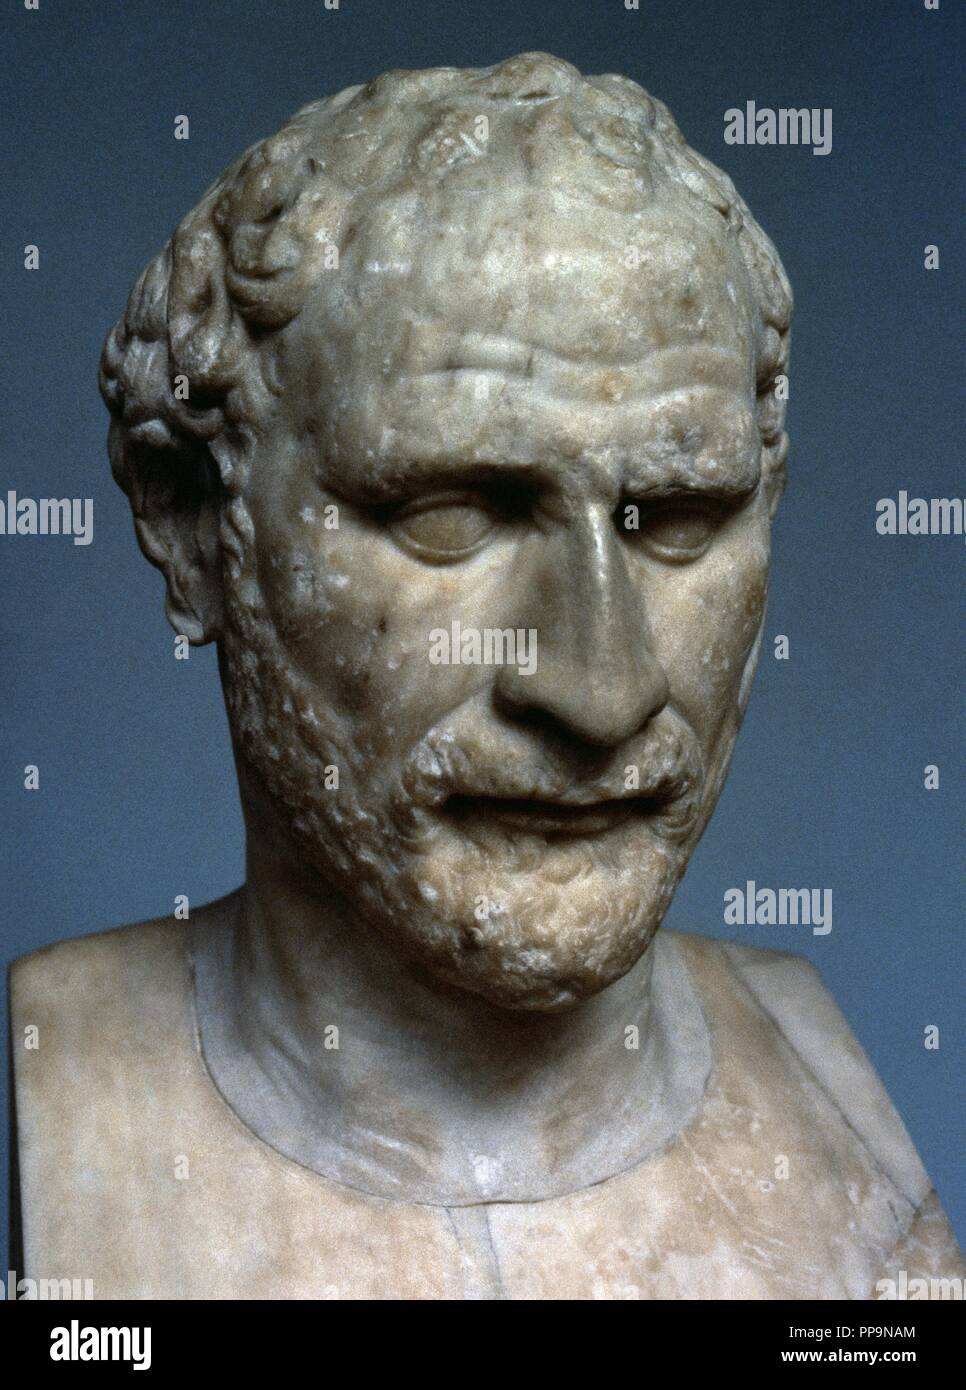 Demosthenes (384-322 BC). Political and Athenian orator. Bust. Roman copy of a Greek original by Polyeuktos, erected in the Agora of Athens in 280 BC. British Museum. London. England. Stock Photo